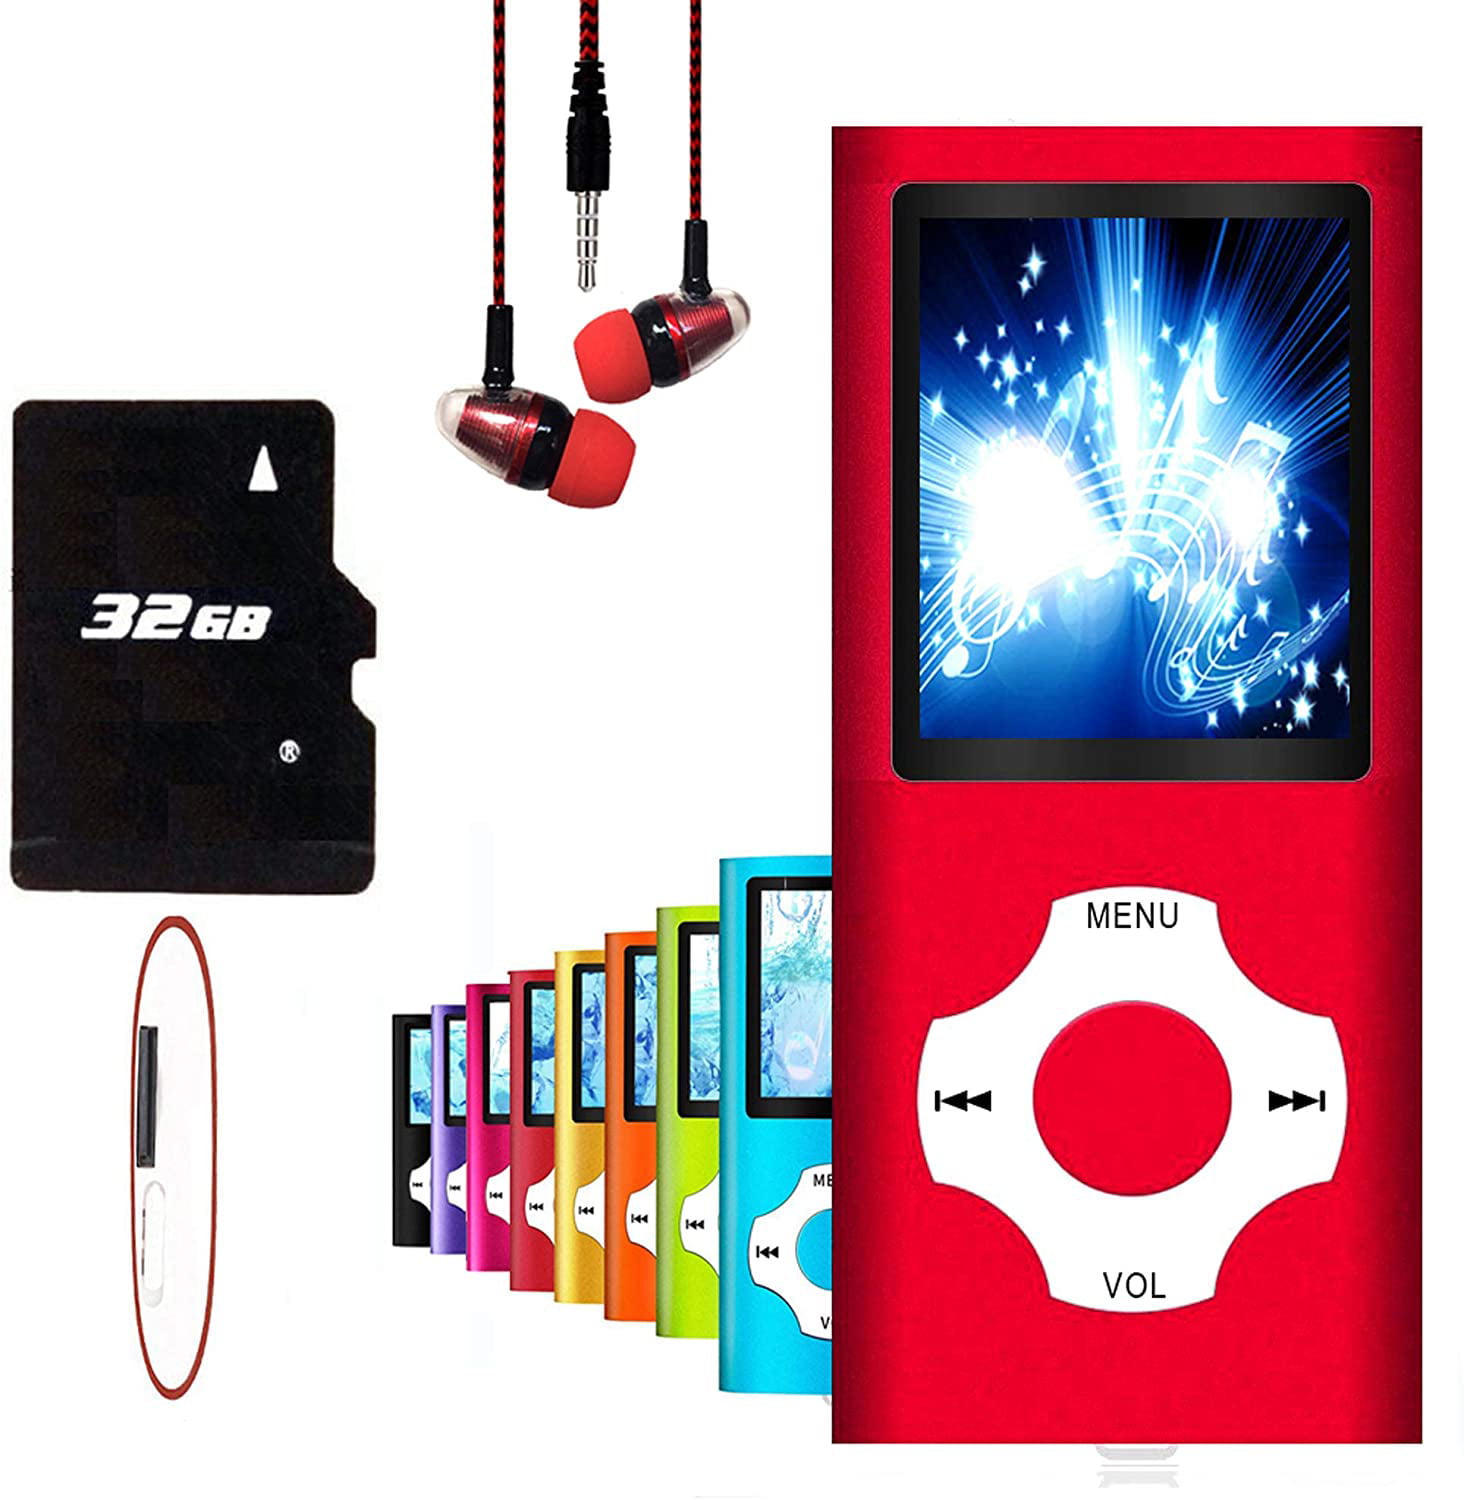 MP4 Player MP3 Player Hotechs MP3 Music Player with 32GB Memory SD Card Slim Classic Digital LCD 1.82 Screen Mini USB Port with FM Radio Voice Record 